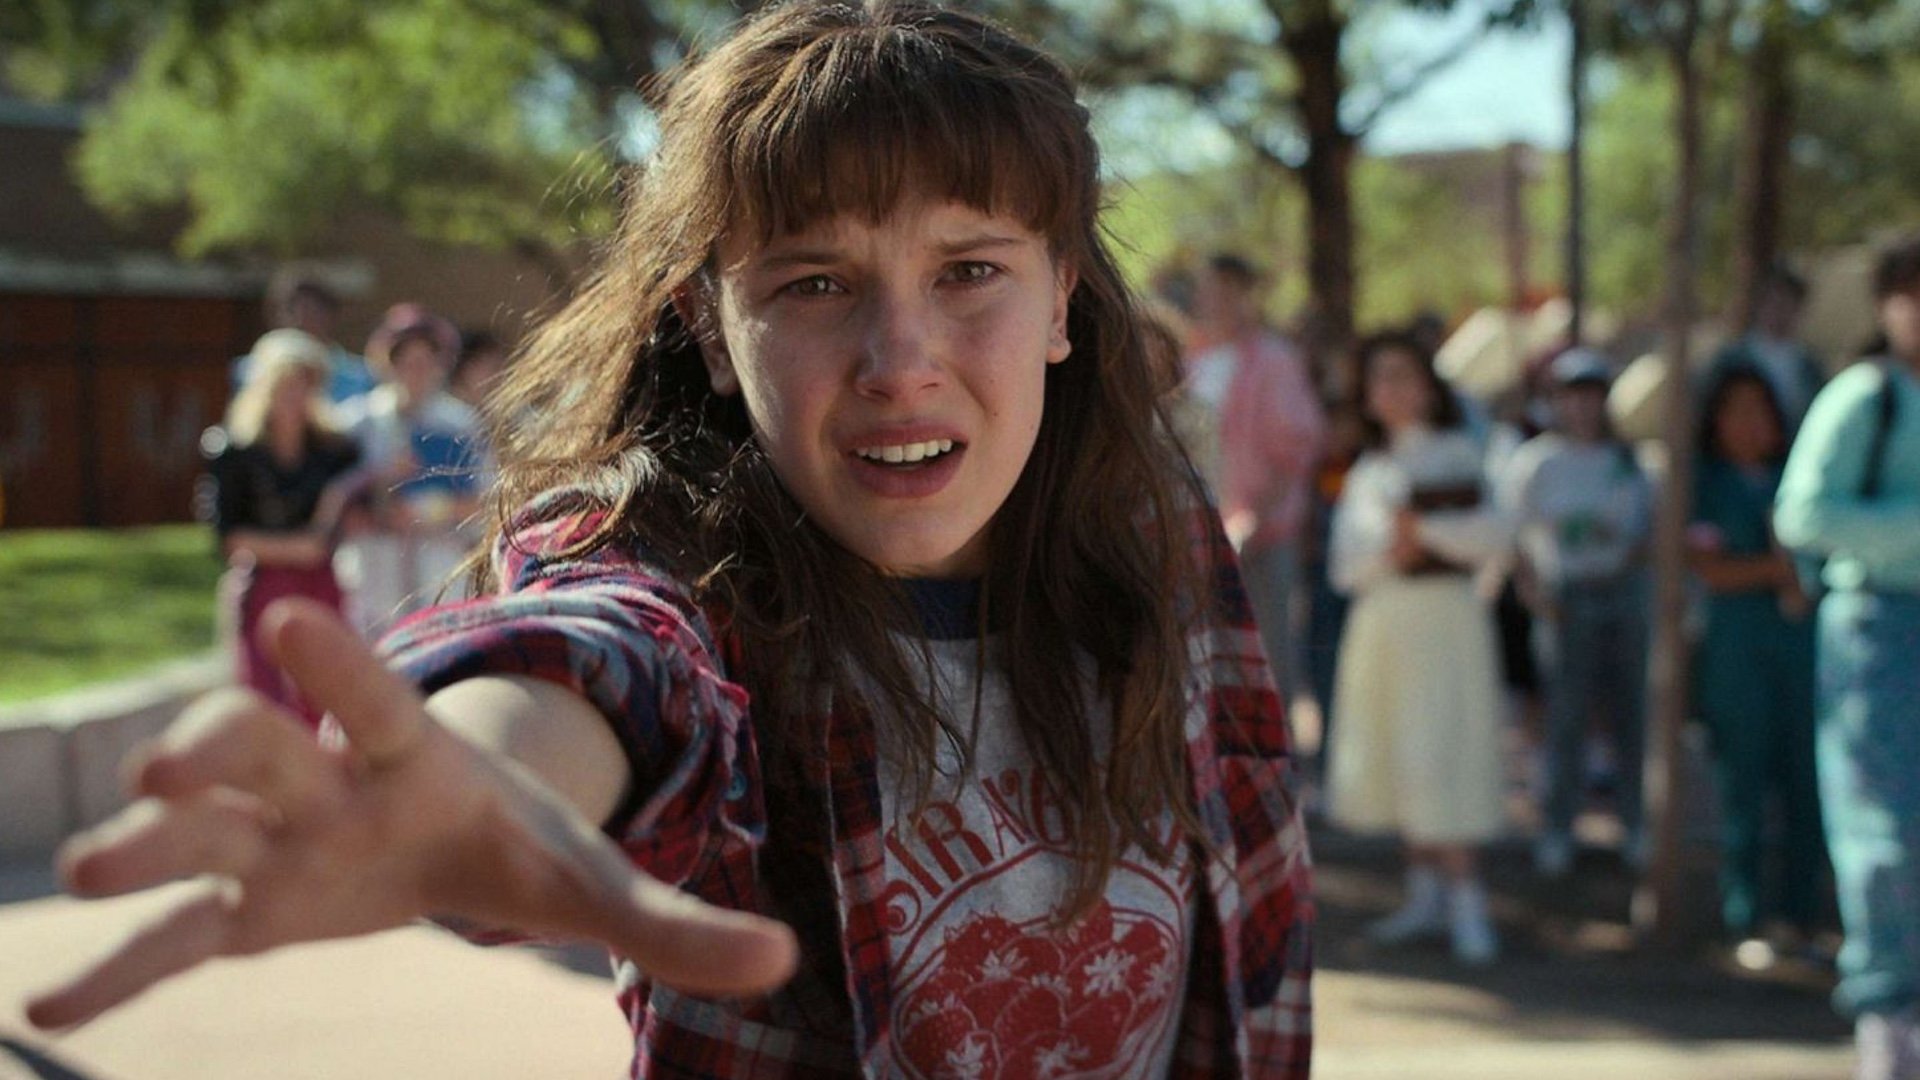 Stranger Things Gears Up for a Thrilling Final Season - iHorror